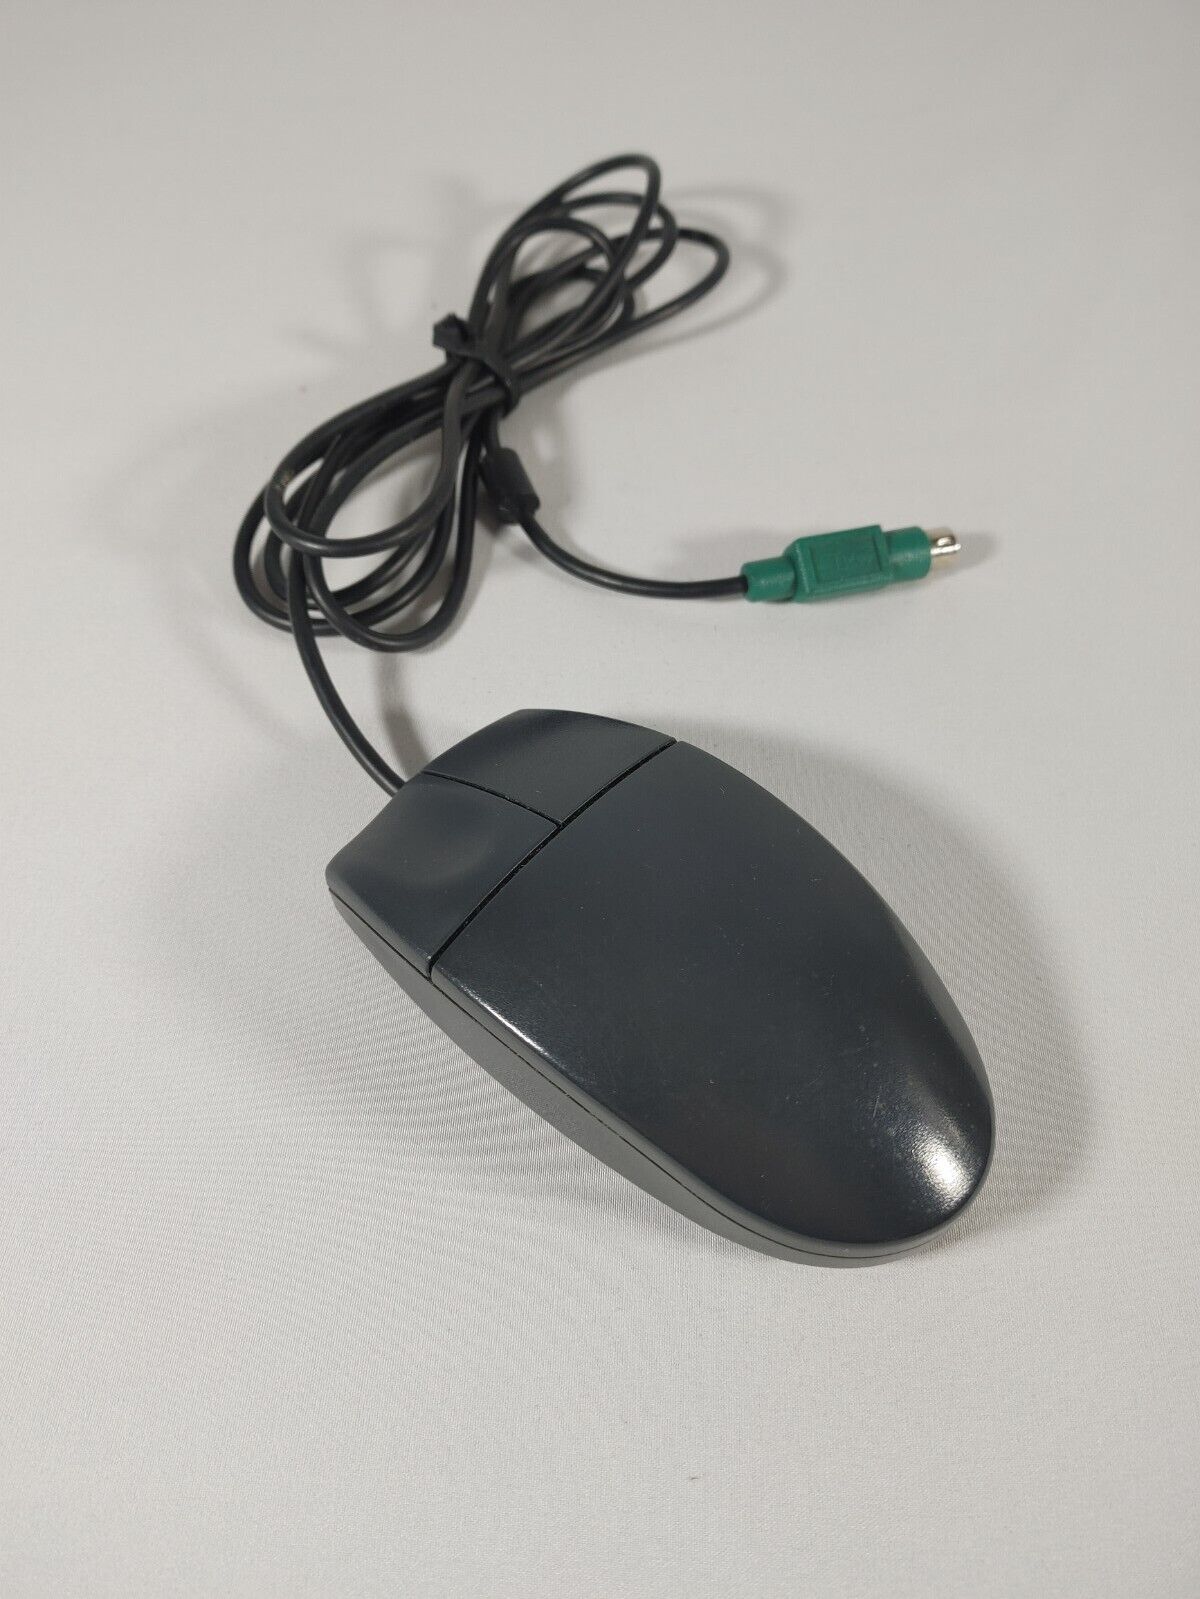 VINTAGE IBM/Logitech Two-Button Ball Mouse PS/2 - M-S34 N231 Tested and working